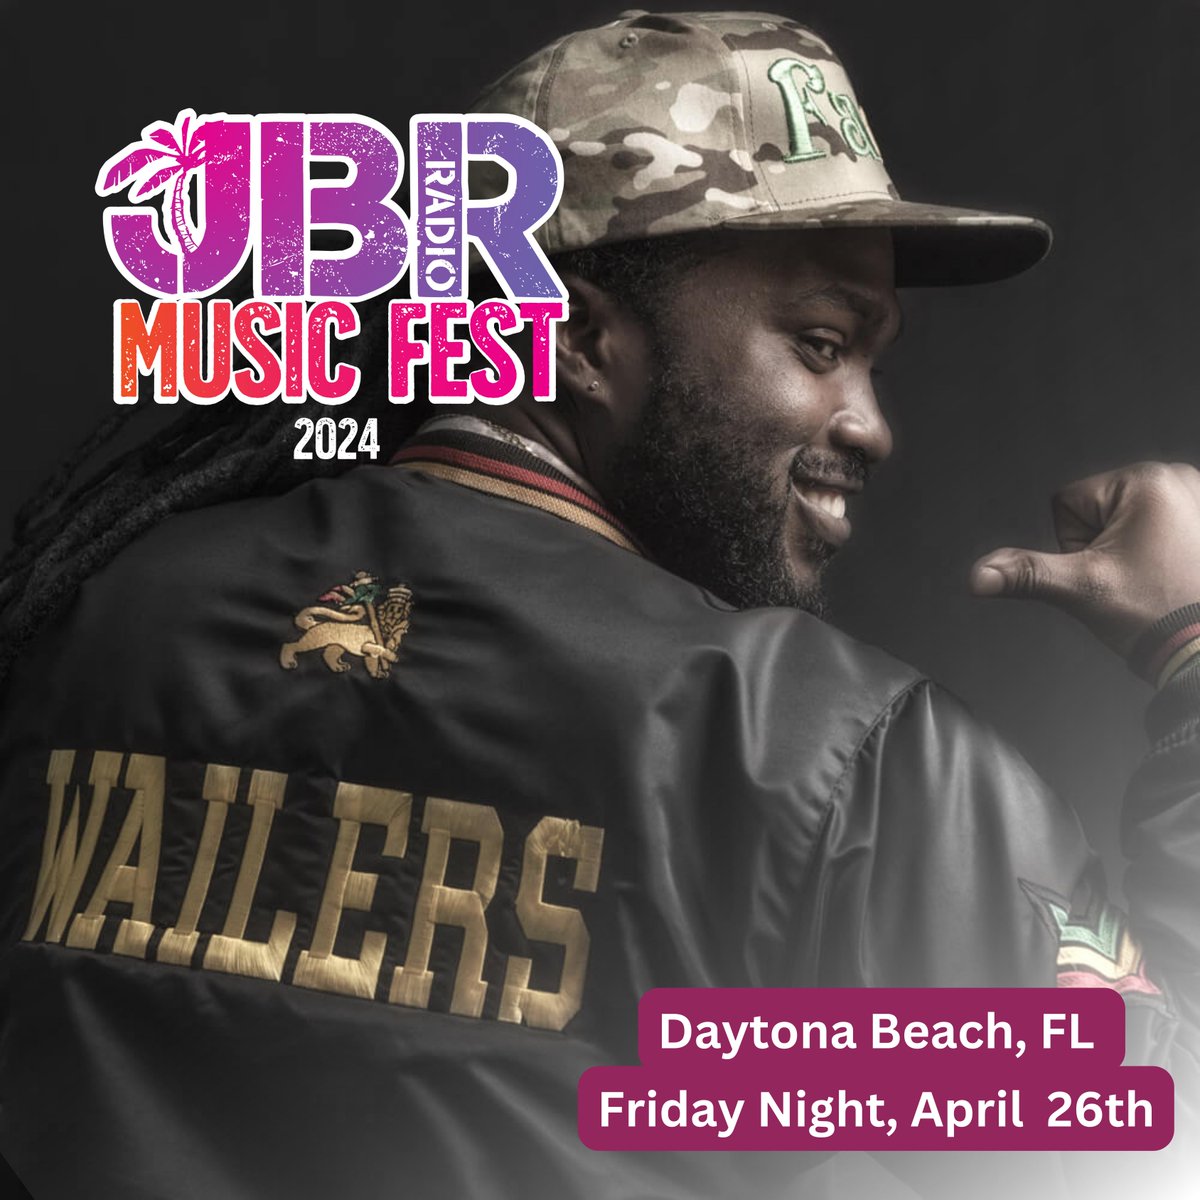 So excited to join the Jamily April 26th at Jeep Beach 2024 in Daytona Beach, FL. We’re gonna see some insane Jeeps and jam on Friday night. Get your tickets now. They’re on sale at 👉 jeepbeach.com! See you in Daytona! 🎉🚙🌴🏖️🎶🌊☀️🕶️🍹🏝️🚜💃🕺🎟️🔊🎵✨ @RealJeepBeach